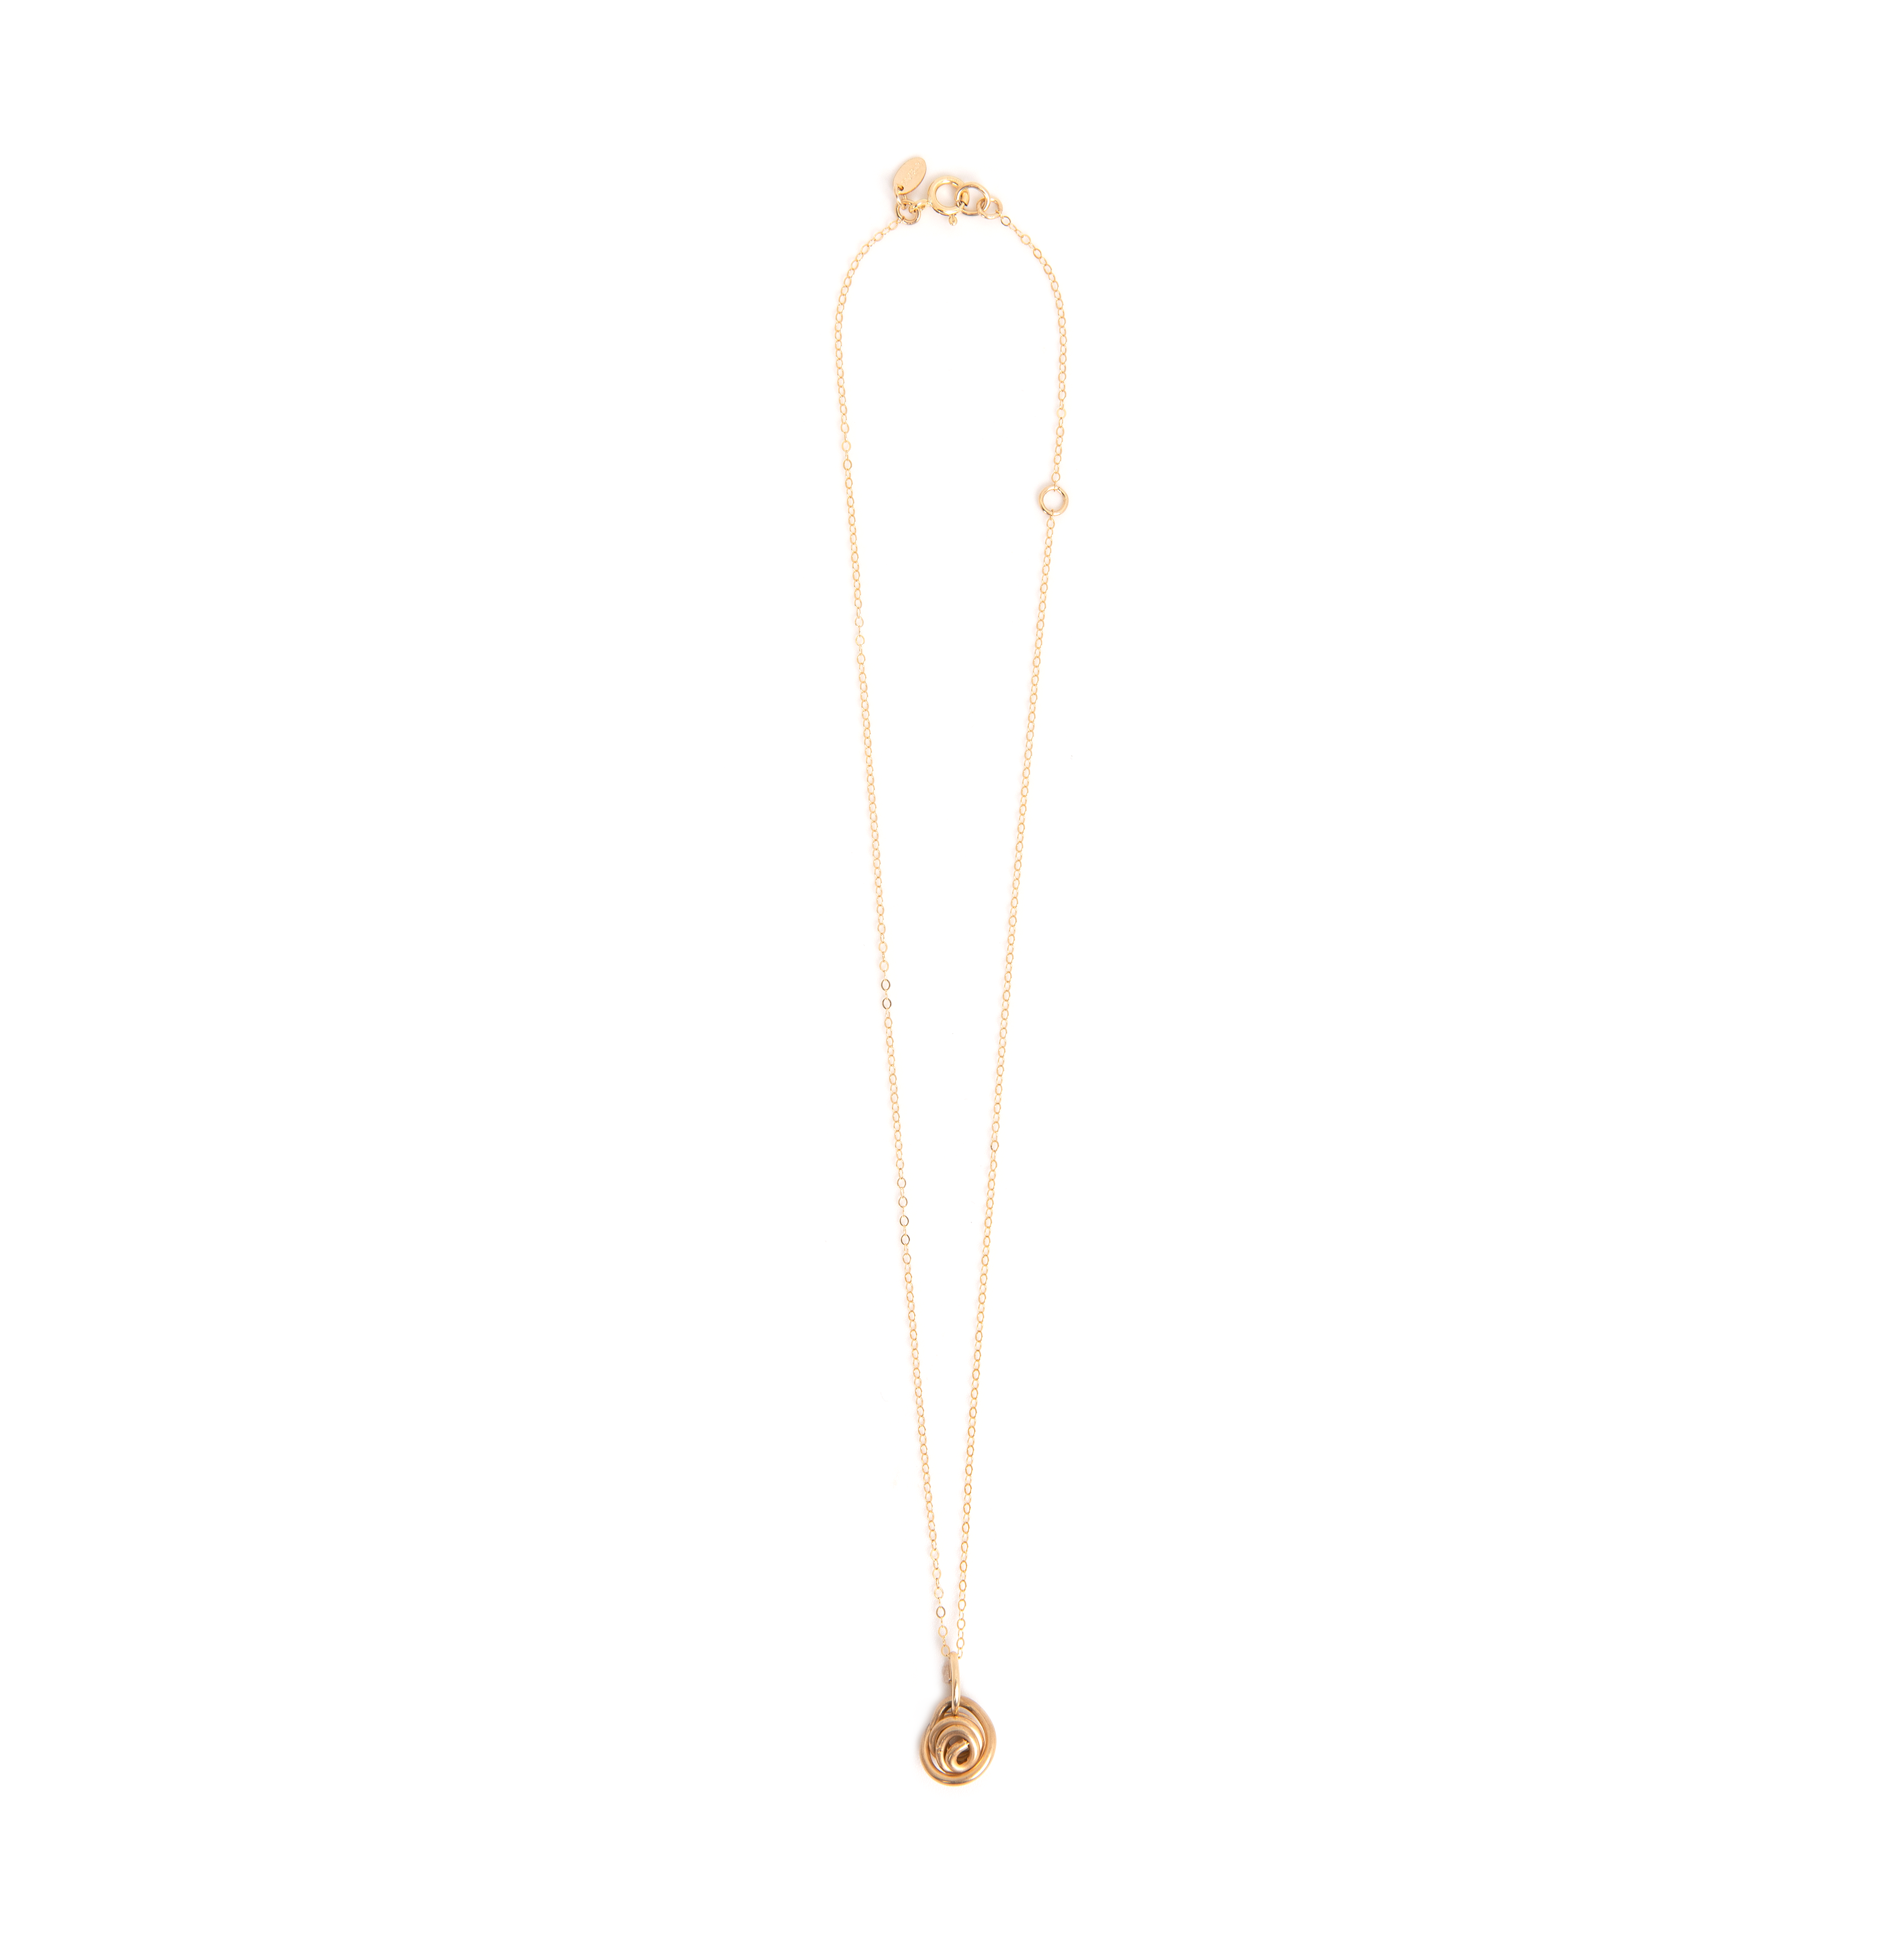 Galaxia Necklace #1 (20mm) - Yellow Gold Necklaces TARBAY   